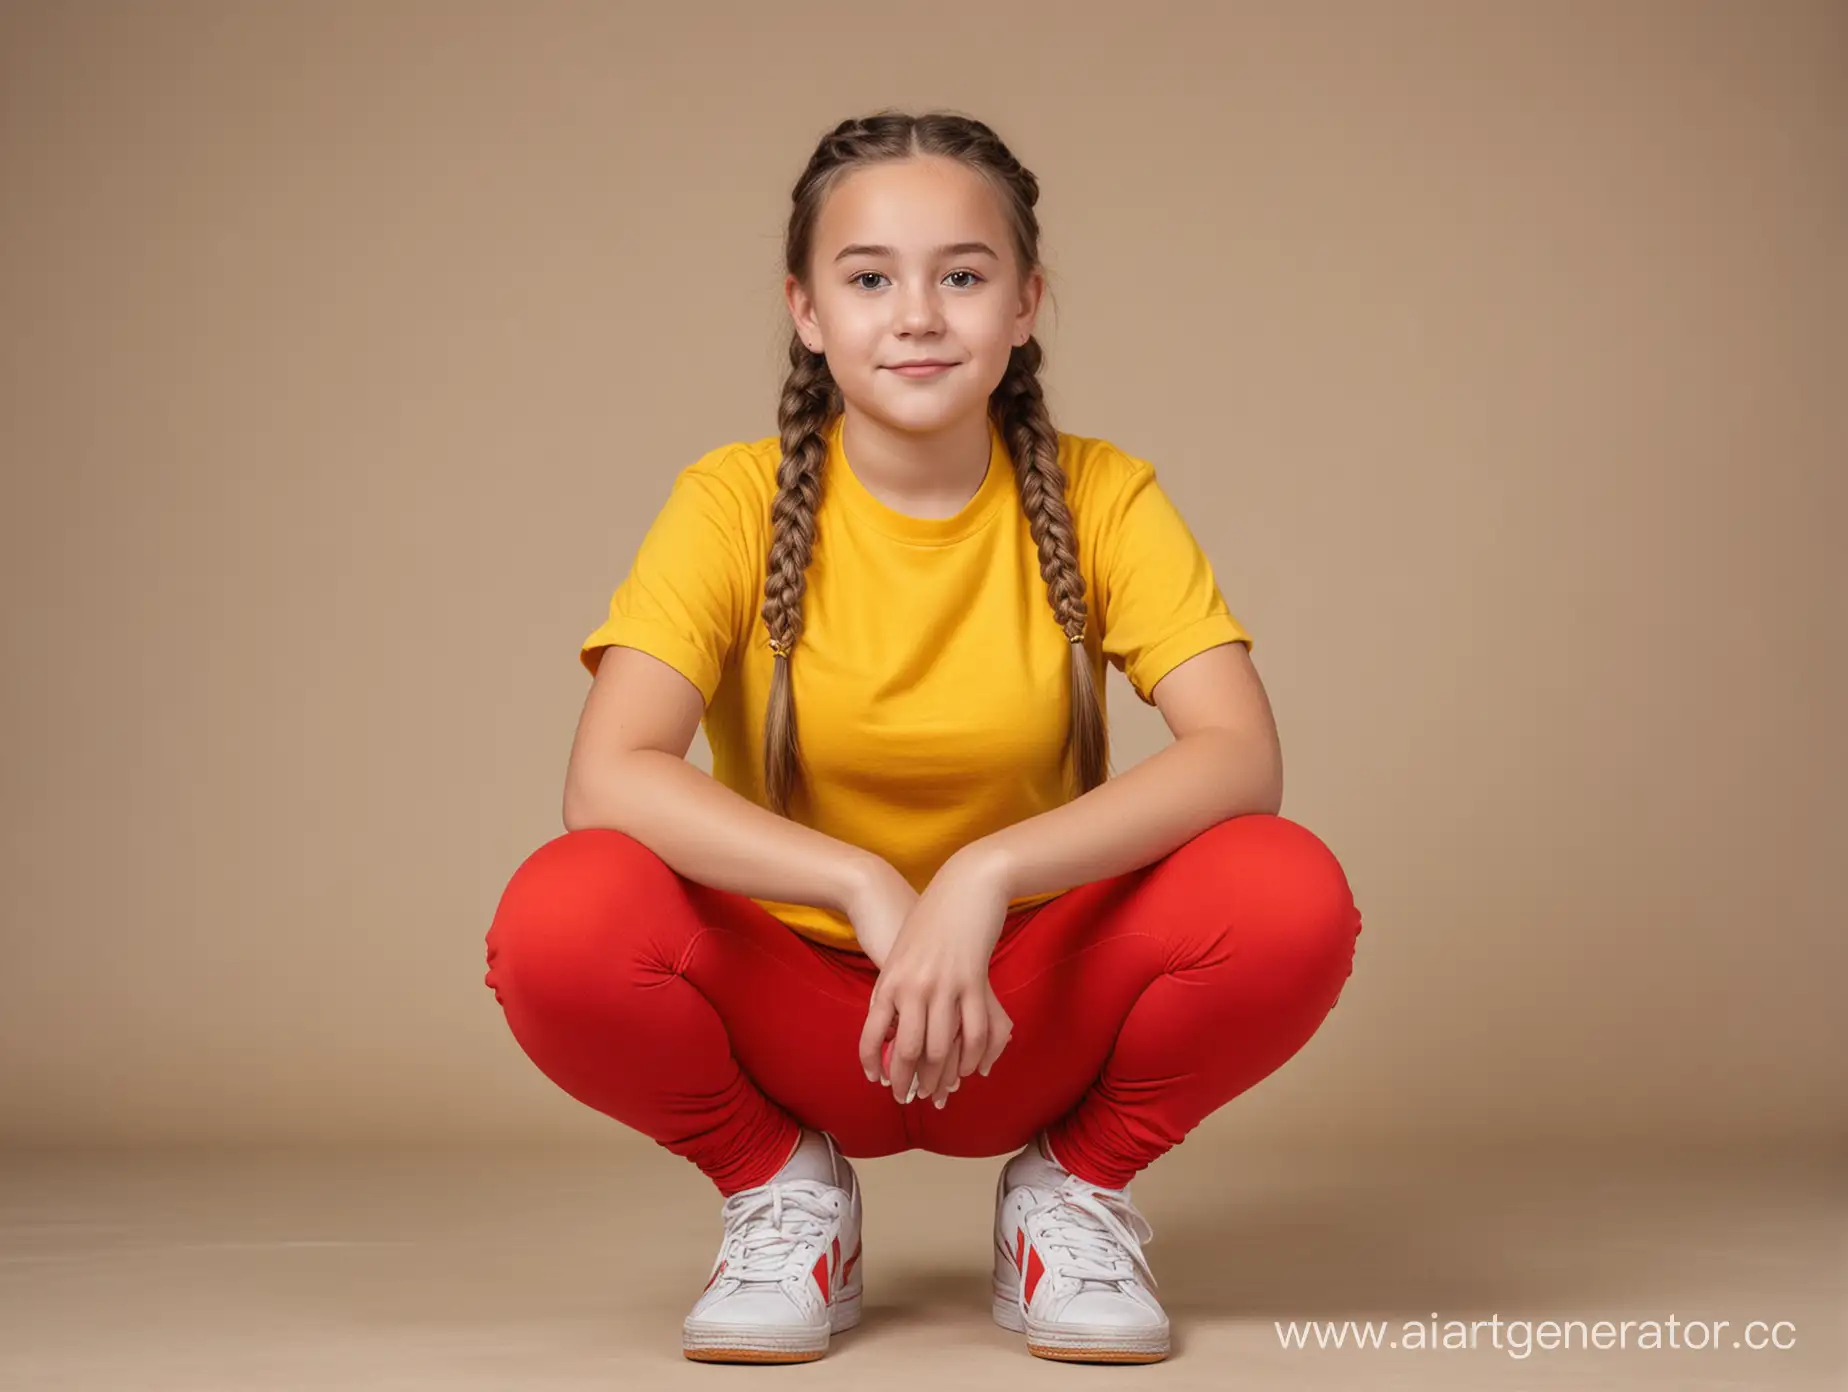 Adorable-12YearOld-Girl-Squatting-in-Yellow-TShirt-and-Red-Leggings